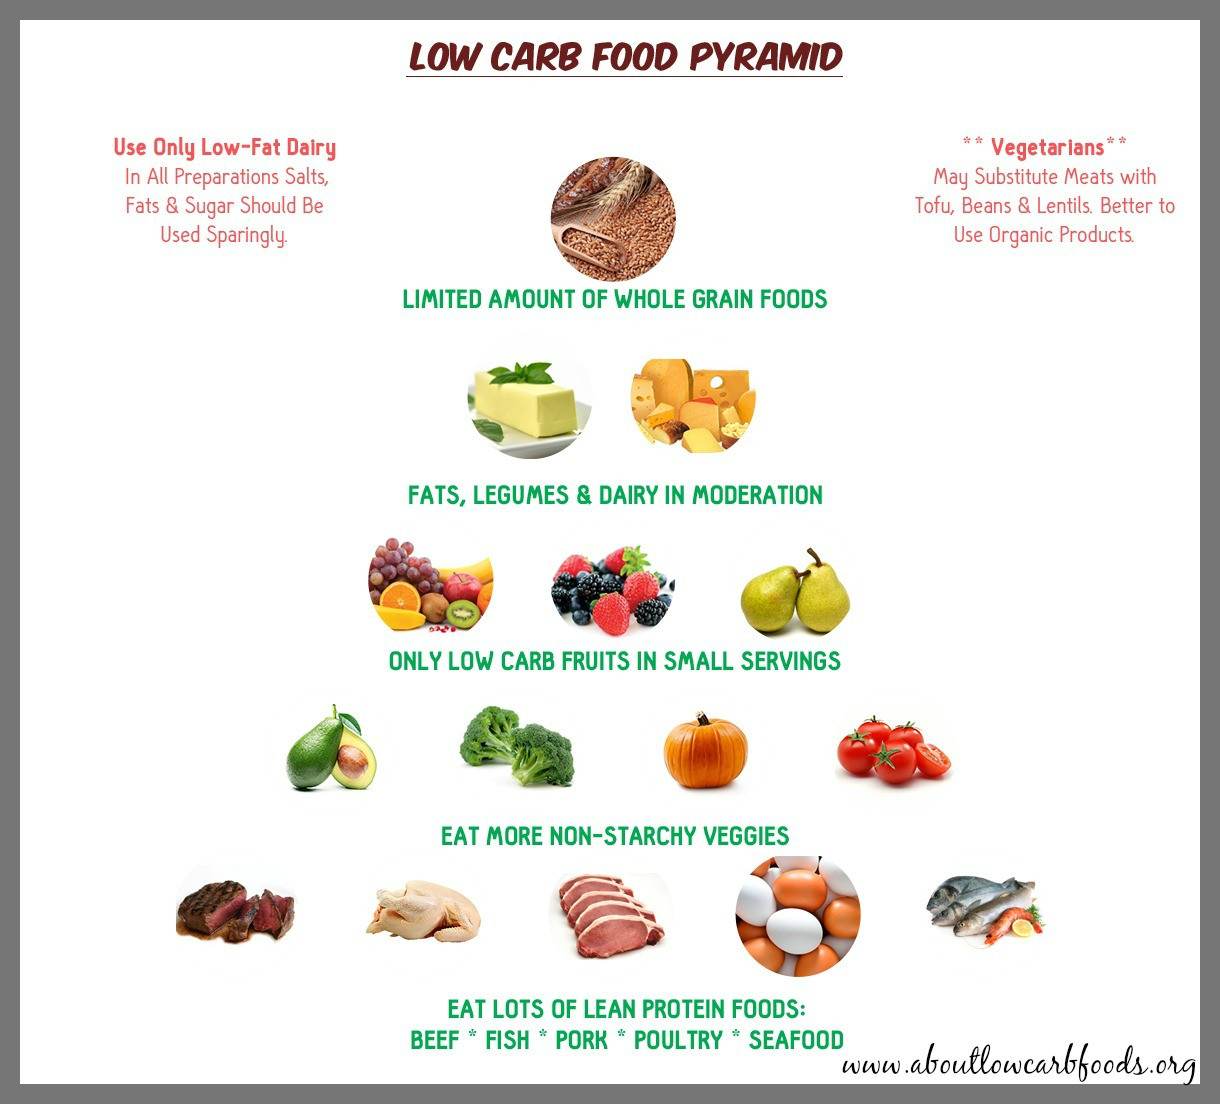 Low Carbohydrate Diet Food Healthy Foods to Eat on a Low Carb Diet About Low Carb Foods